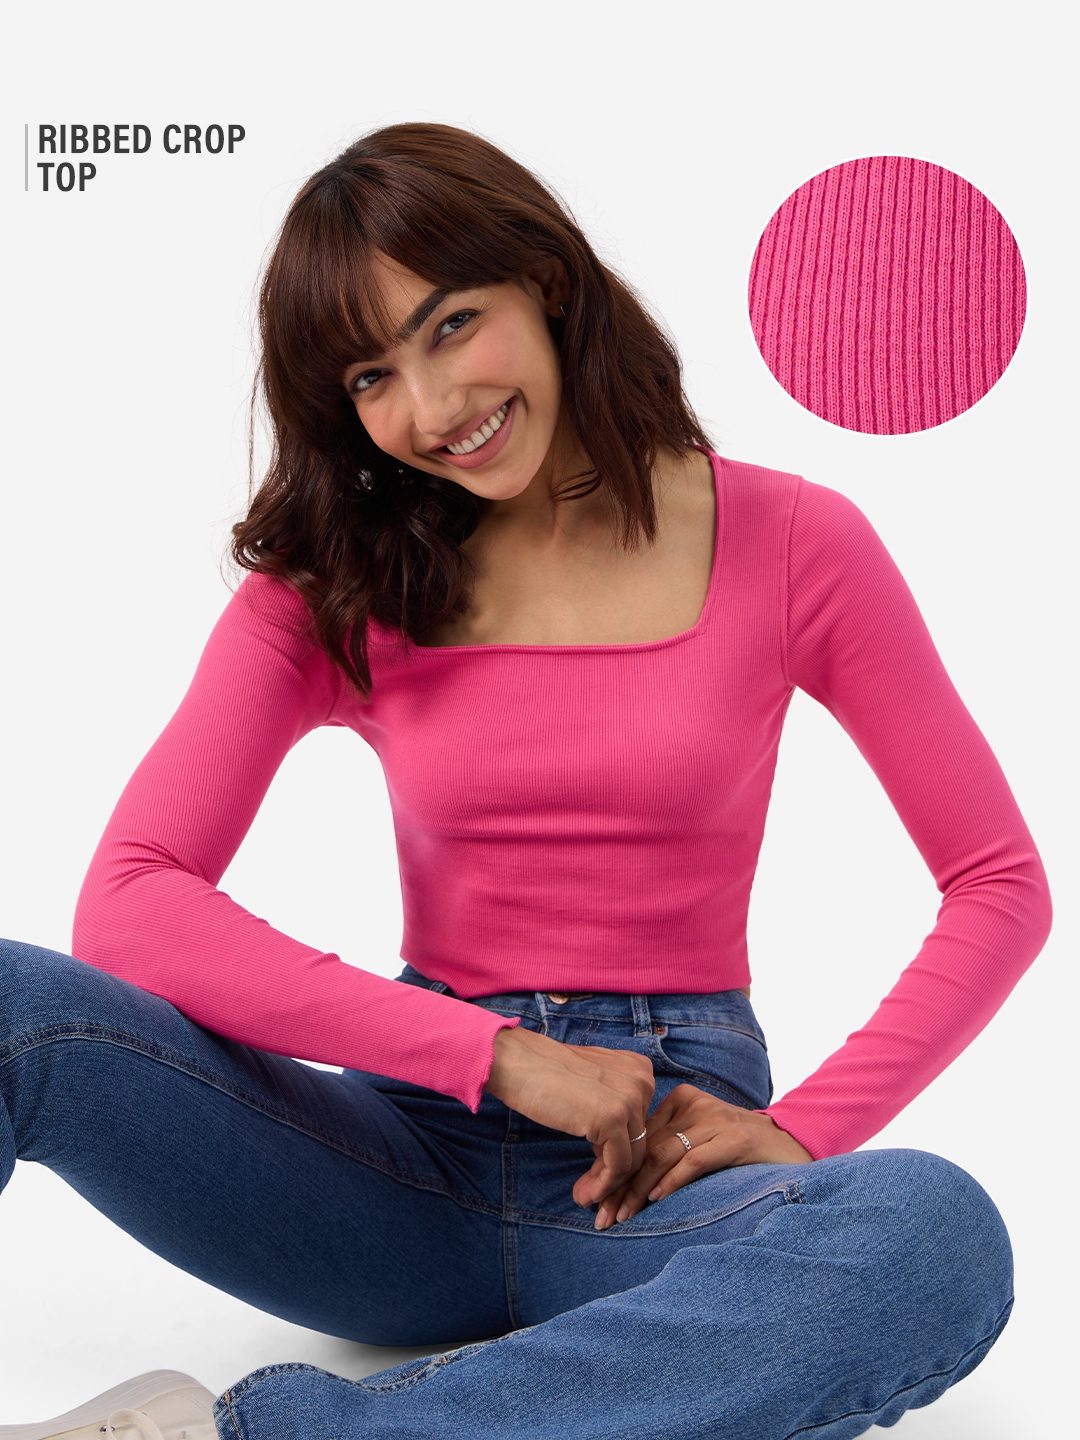 The Souled Store | Women's Hot-Pink Ribbed Top Women's Full Sleeves Tops